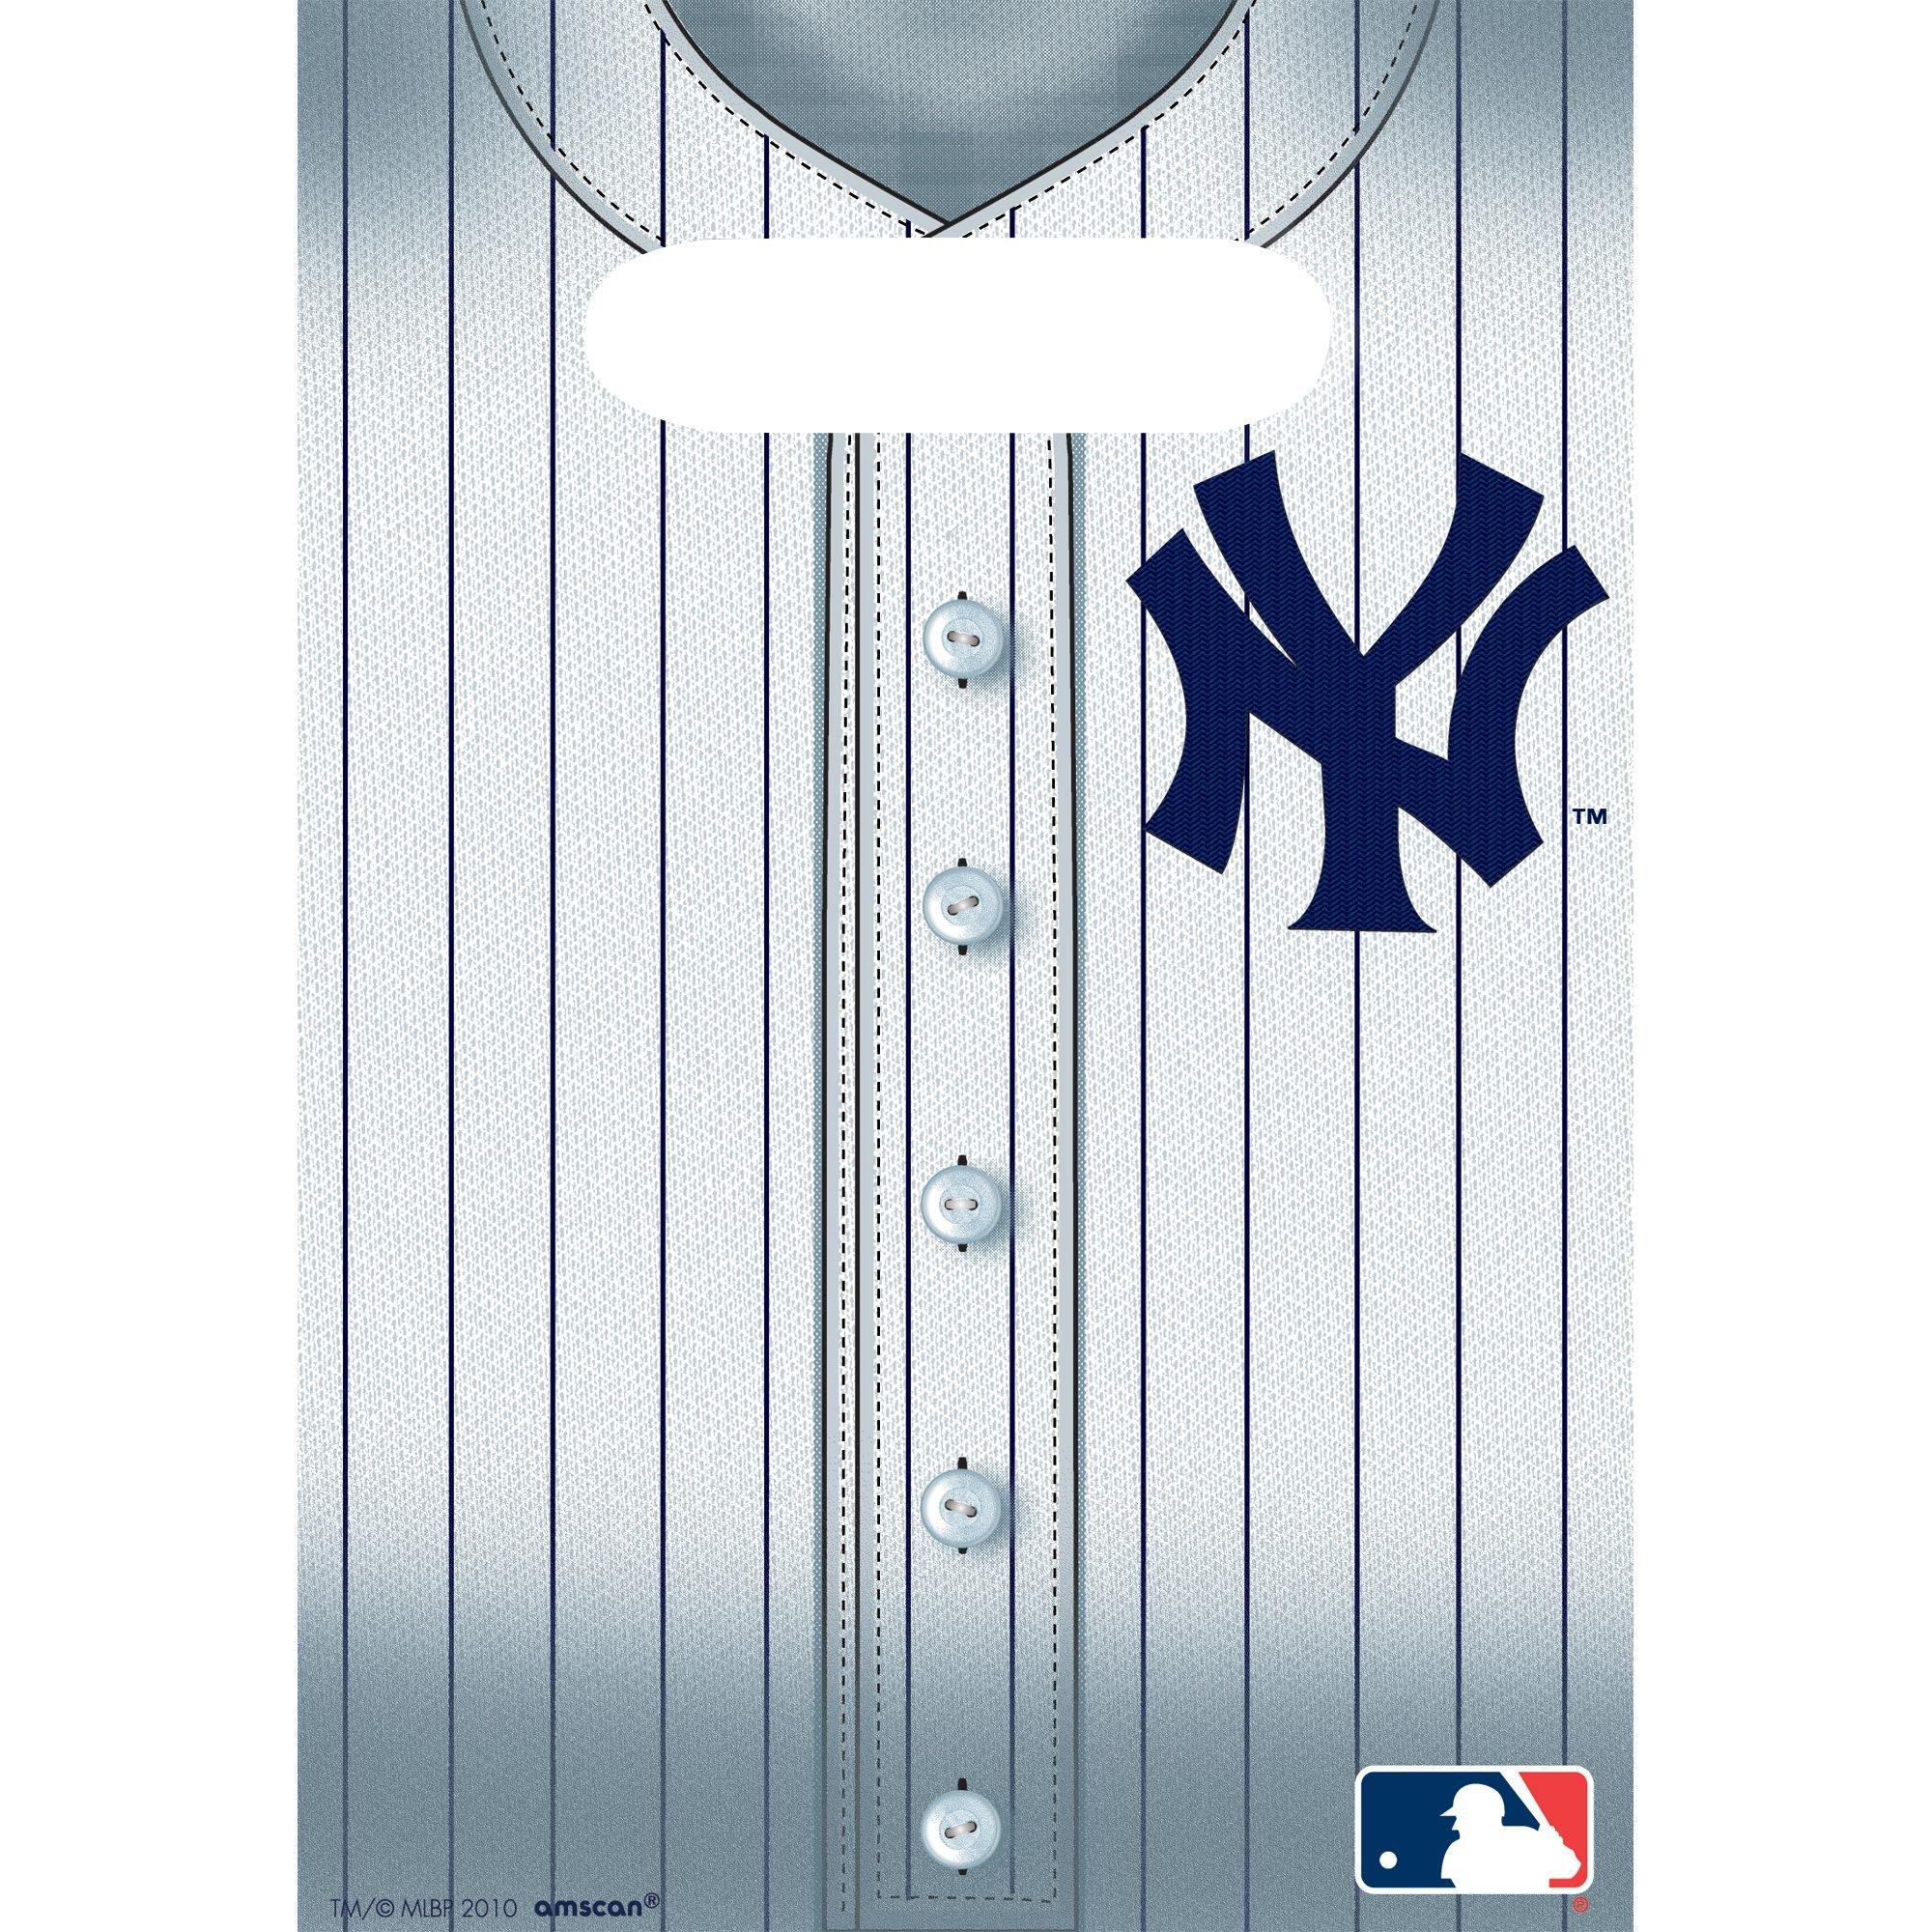 New York Yankees Officially Licensed Dog Jersey - Pinstripe